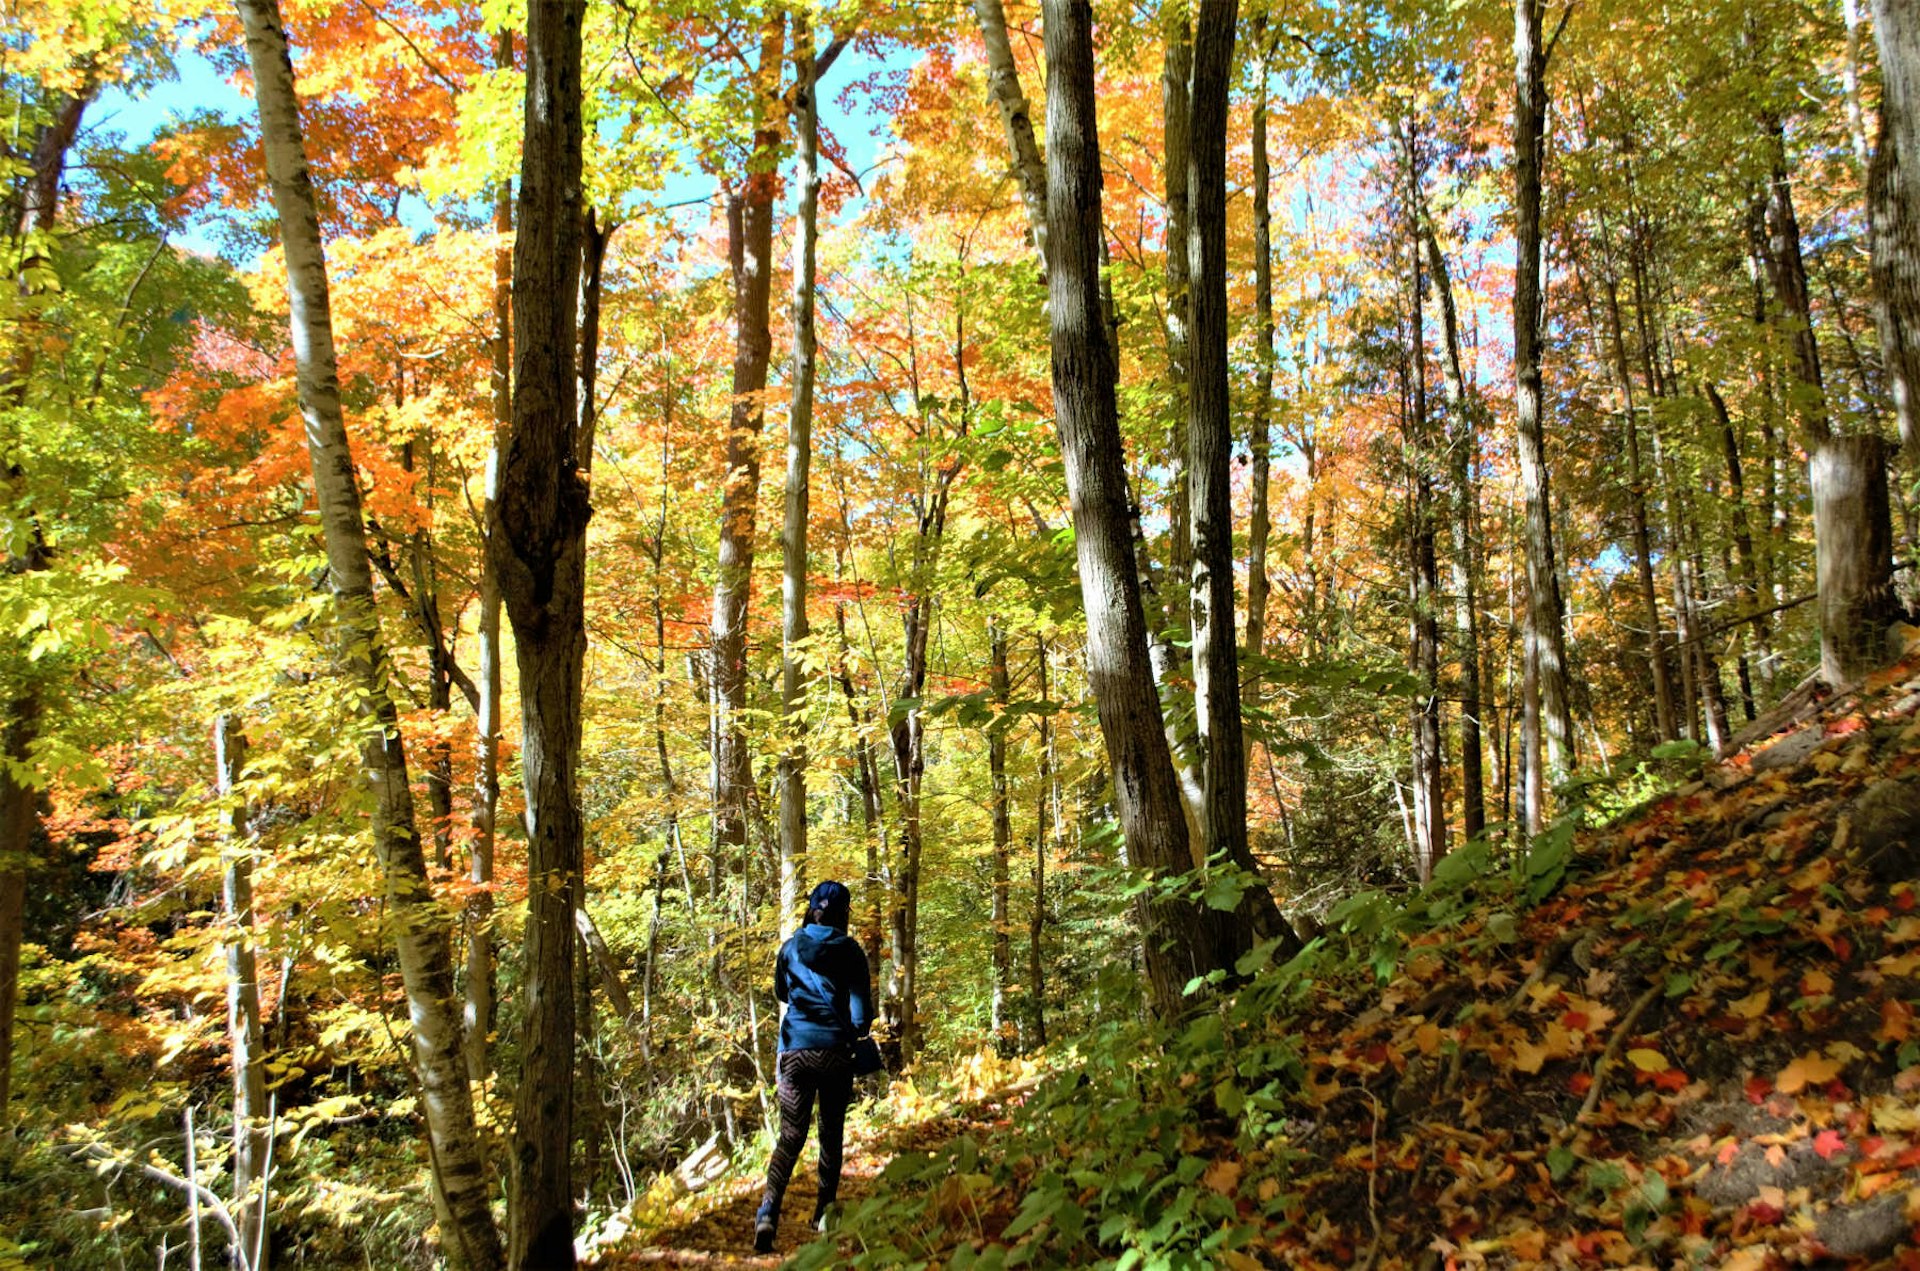 A woman walks along a narrow hiking trail, covered in fallen leaves and surrounded by high trees with fall foliage in Belfountain Conservation Area, Canada